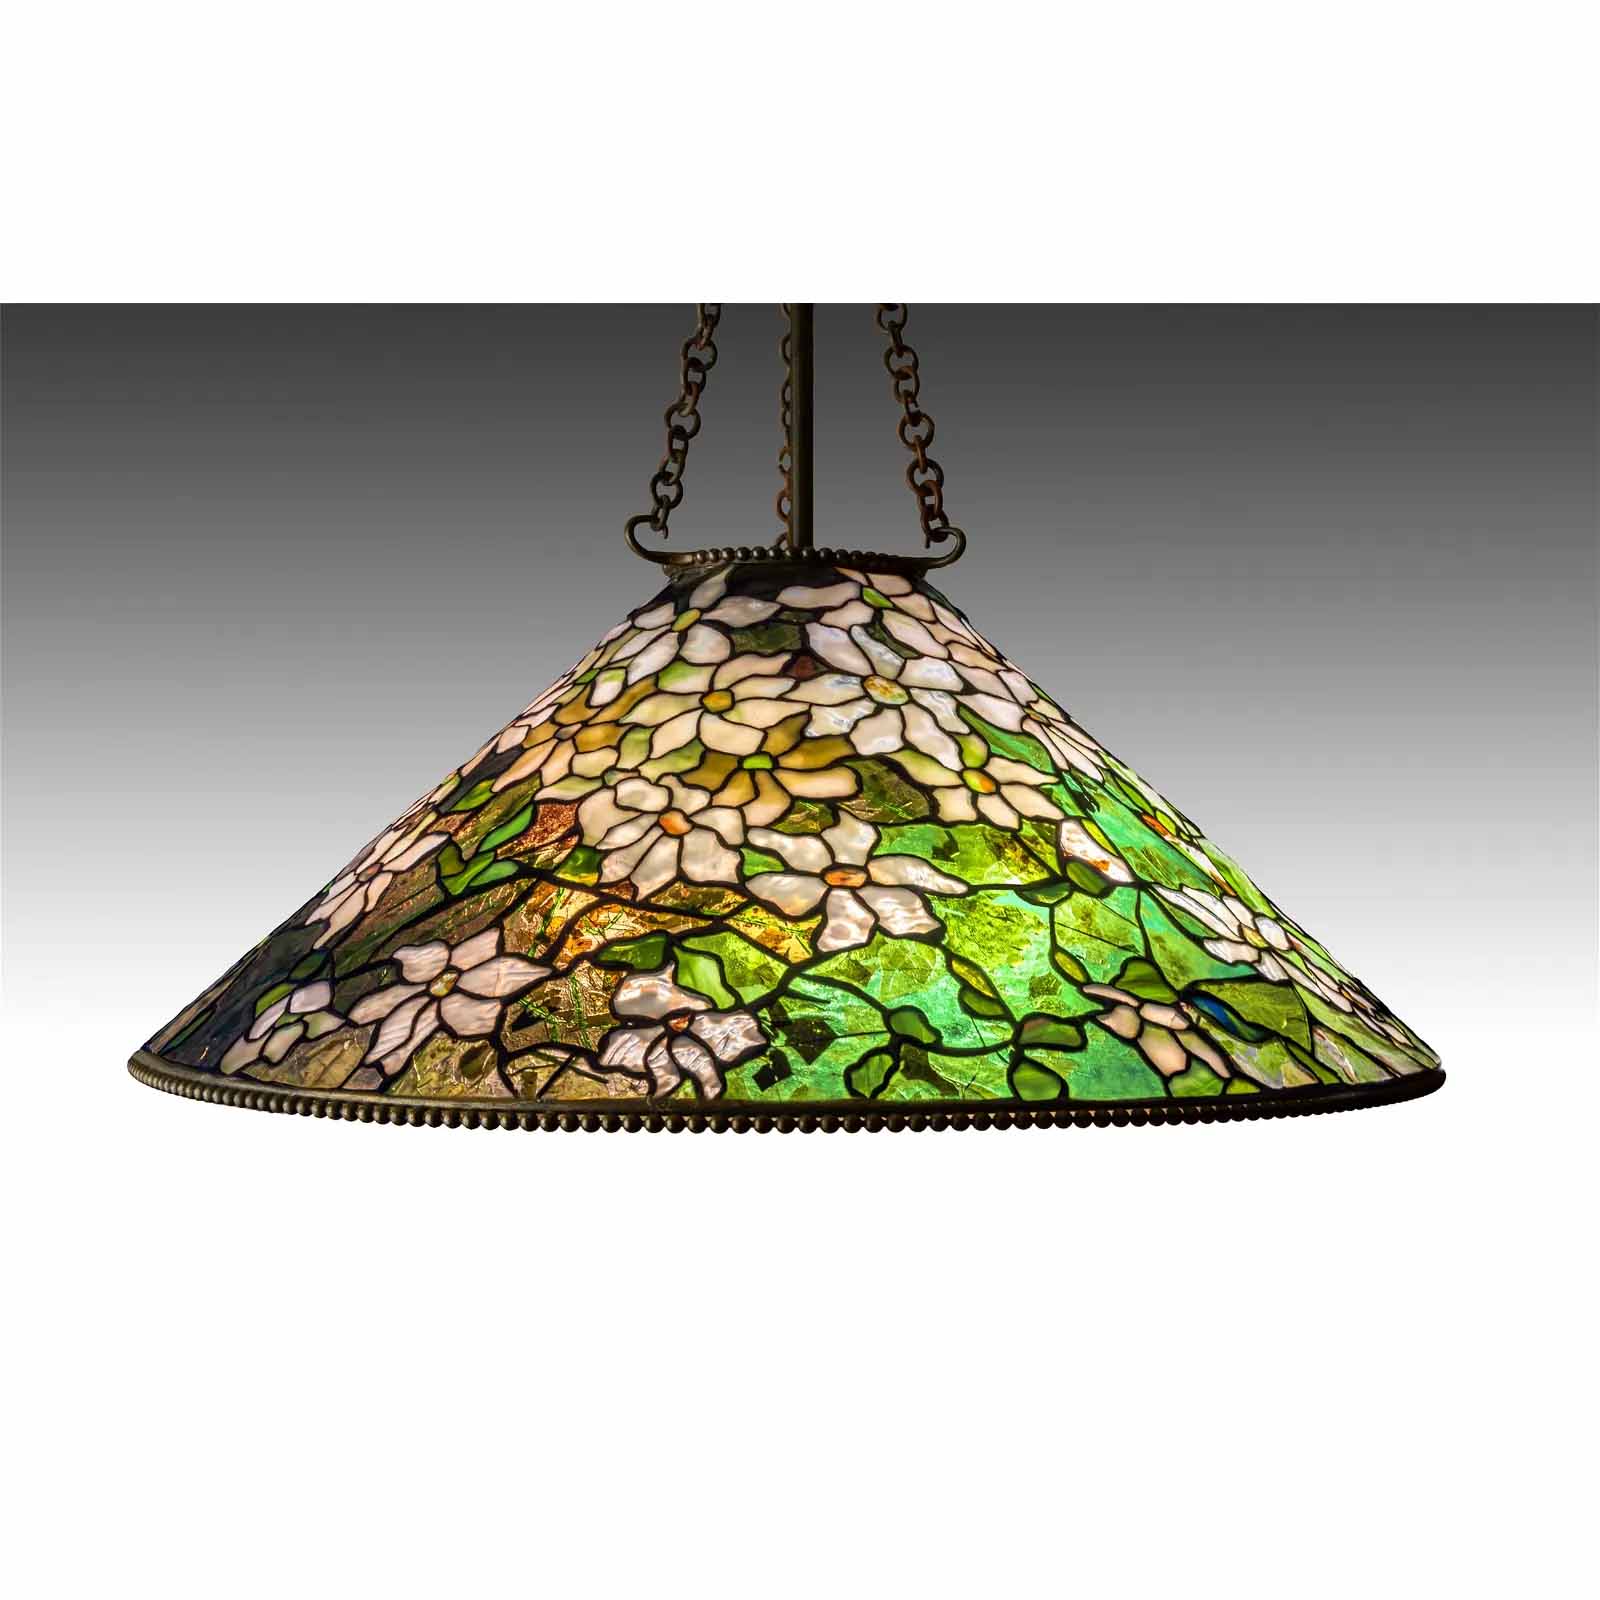 Tiffany Studios Clematis Hanging Light Fixture, estimated at $50,000-$80,000 at Cottone.